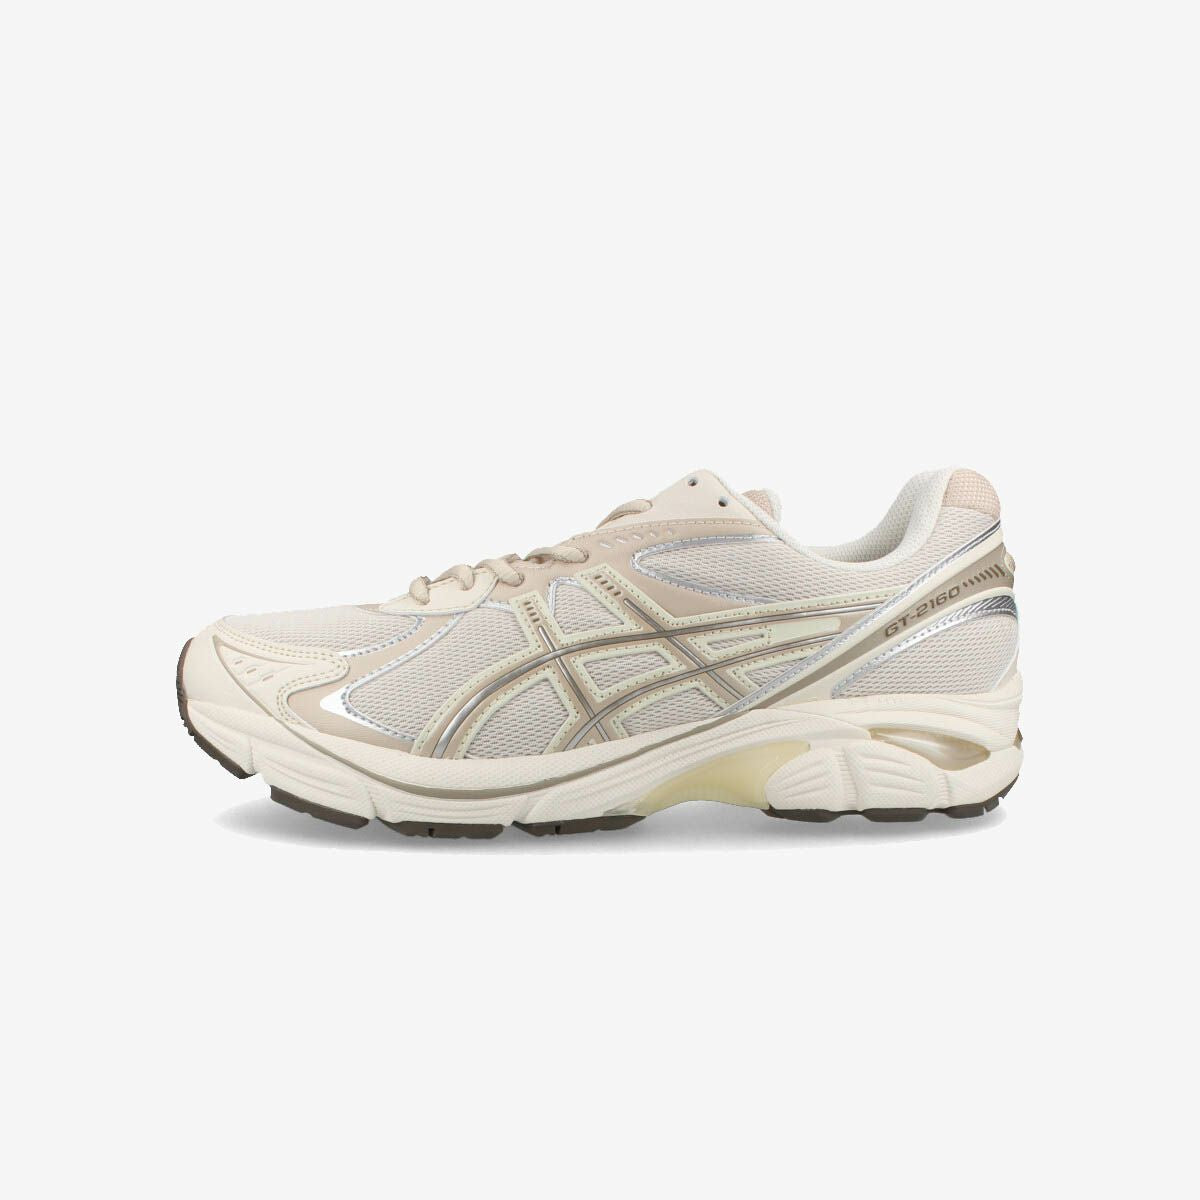 ASICS SPORTSTYLE GT-2160 OATMEAL/SIMPLY TAUPE – KICKS LAB.